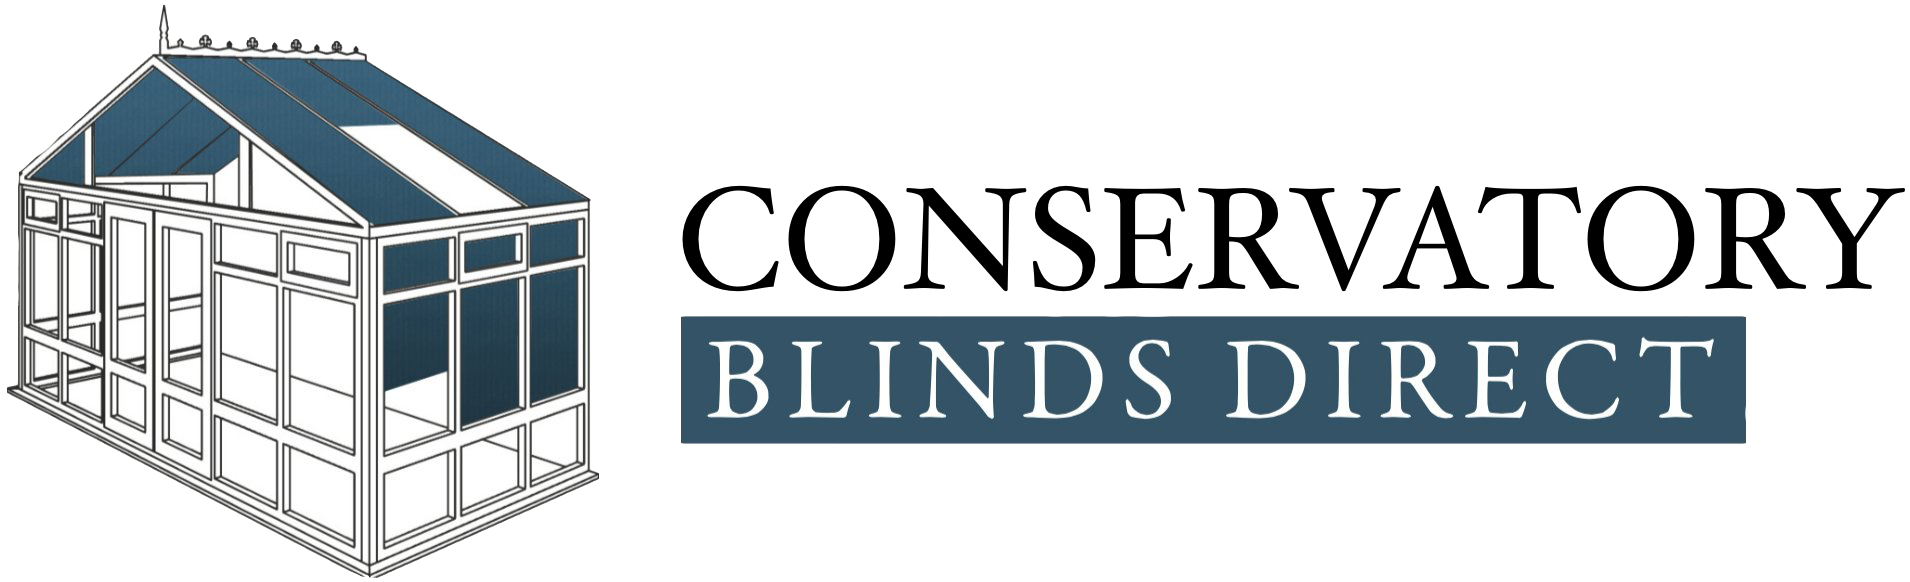 Conservatory Blinds Direct